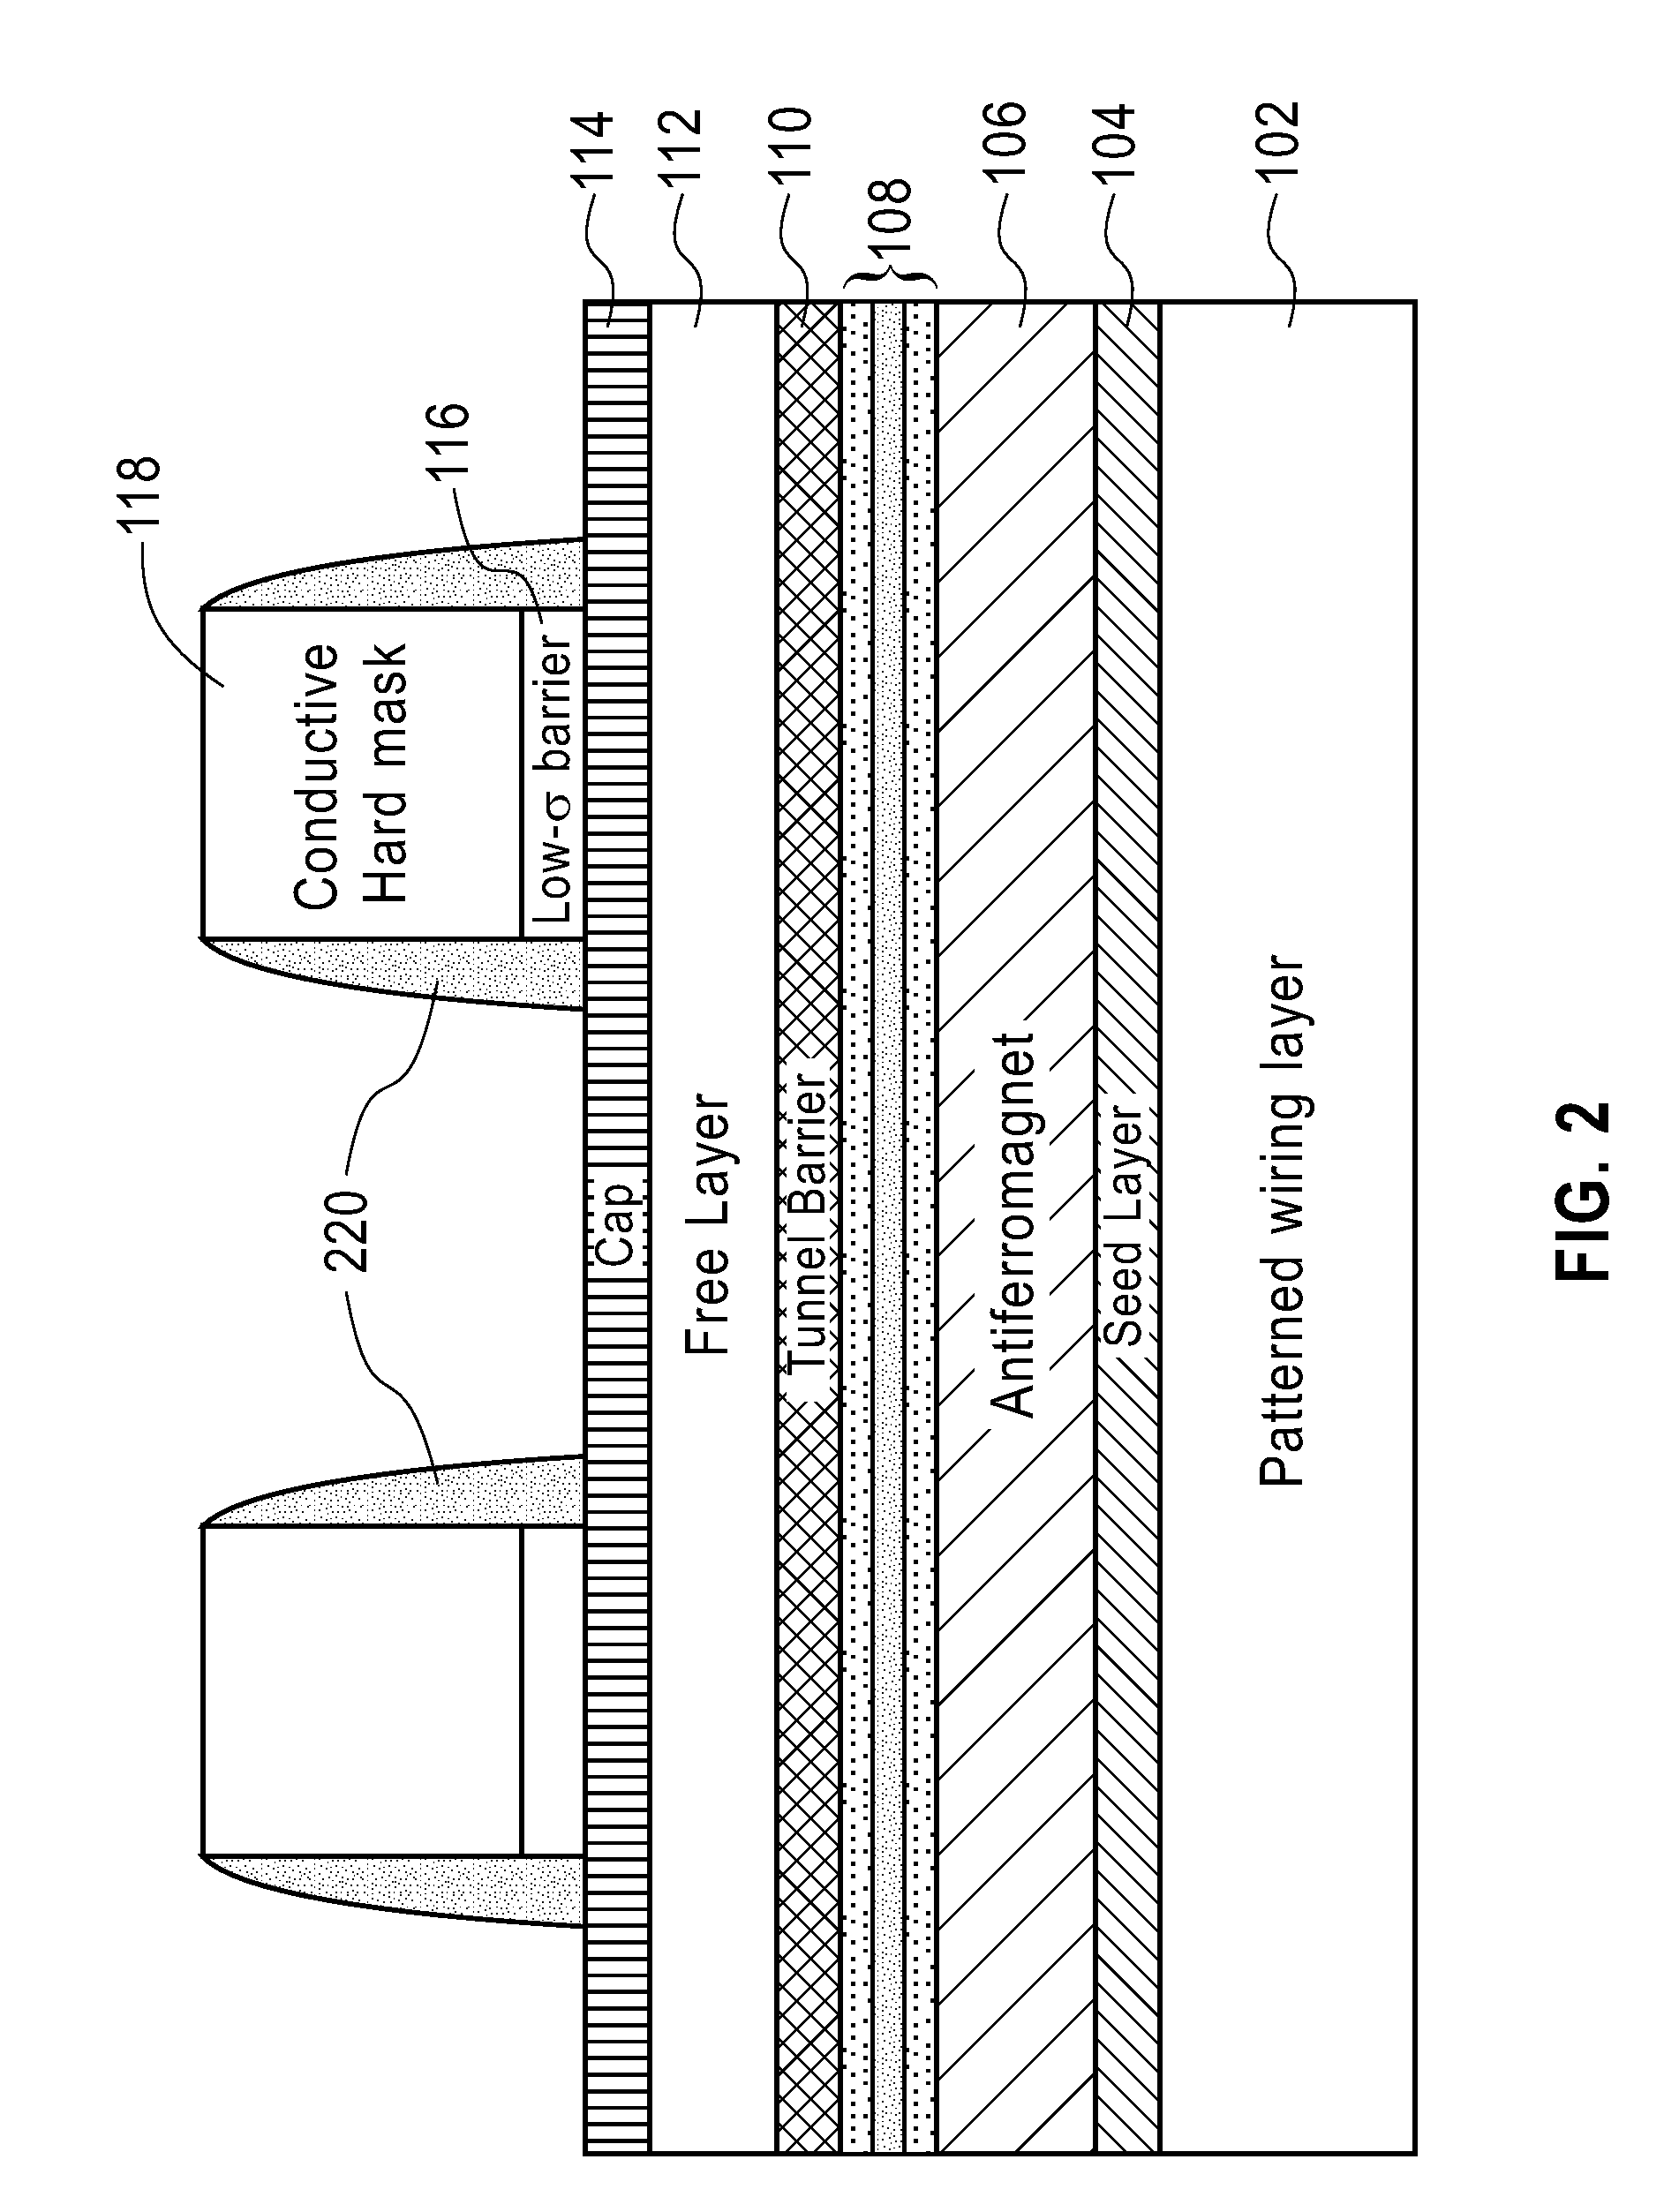 Sidewall coating for non-uniform spin momentum-transfer magnetic tunnel junction current flow